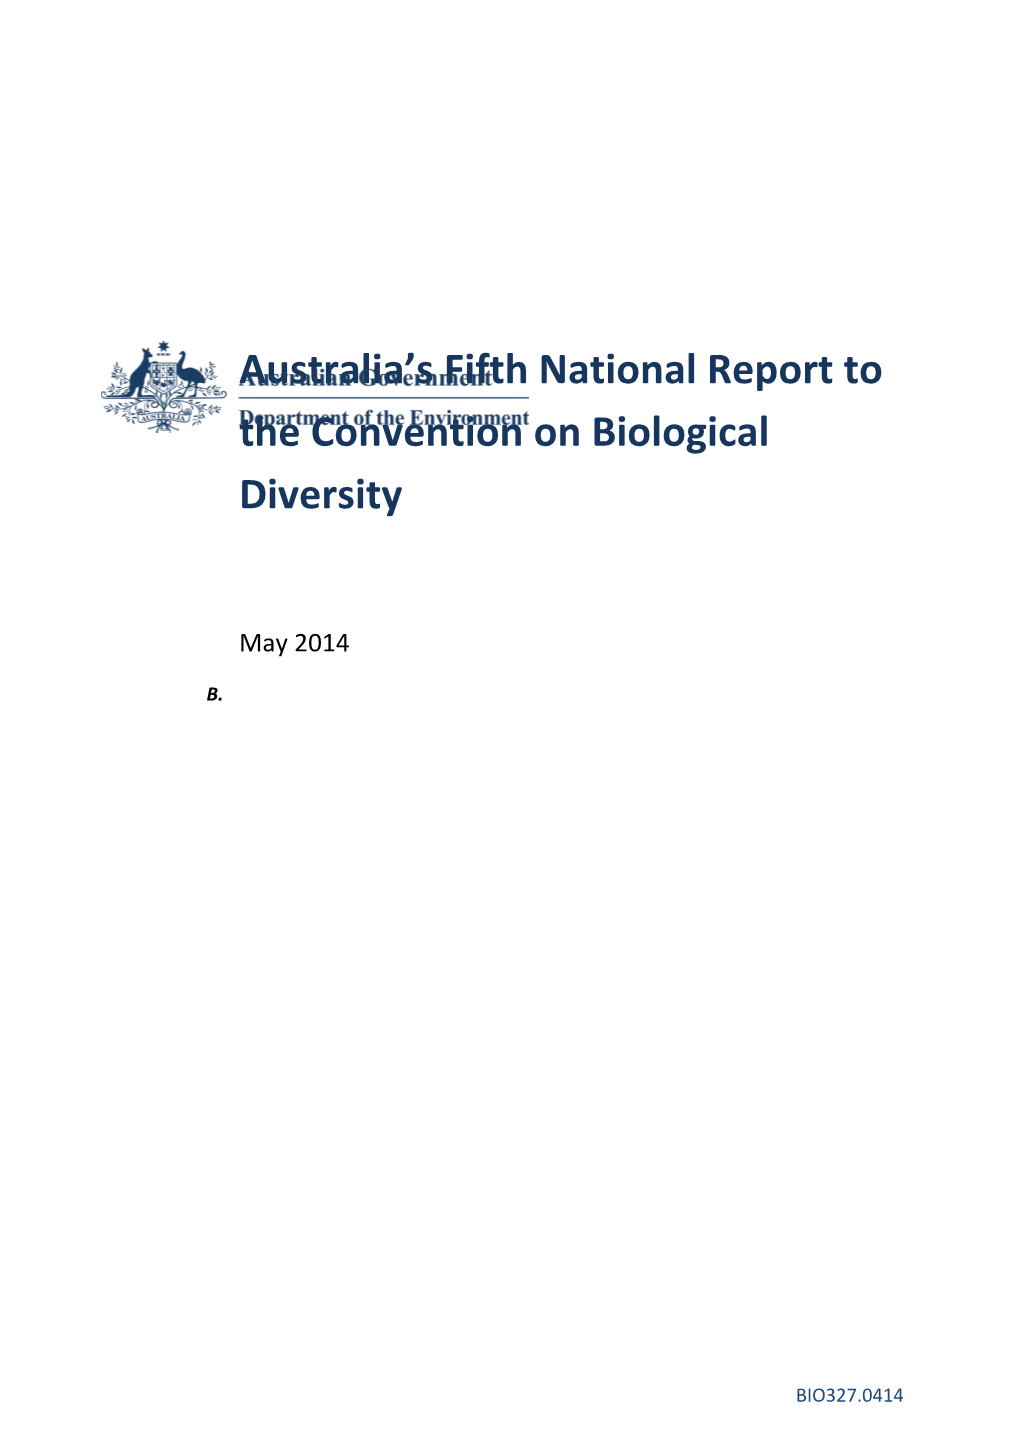 Australia S Fifth National Report to the Convention on Biological Diversity